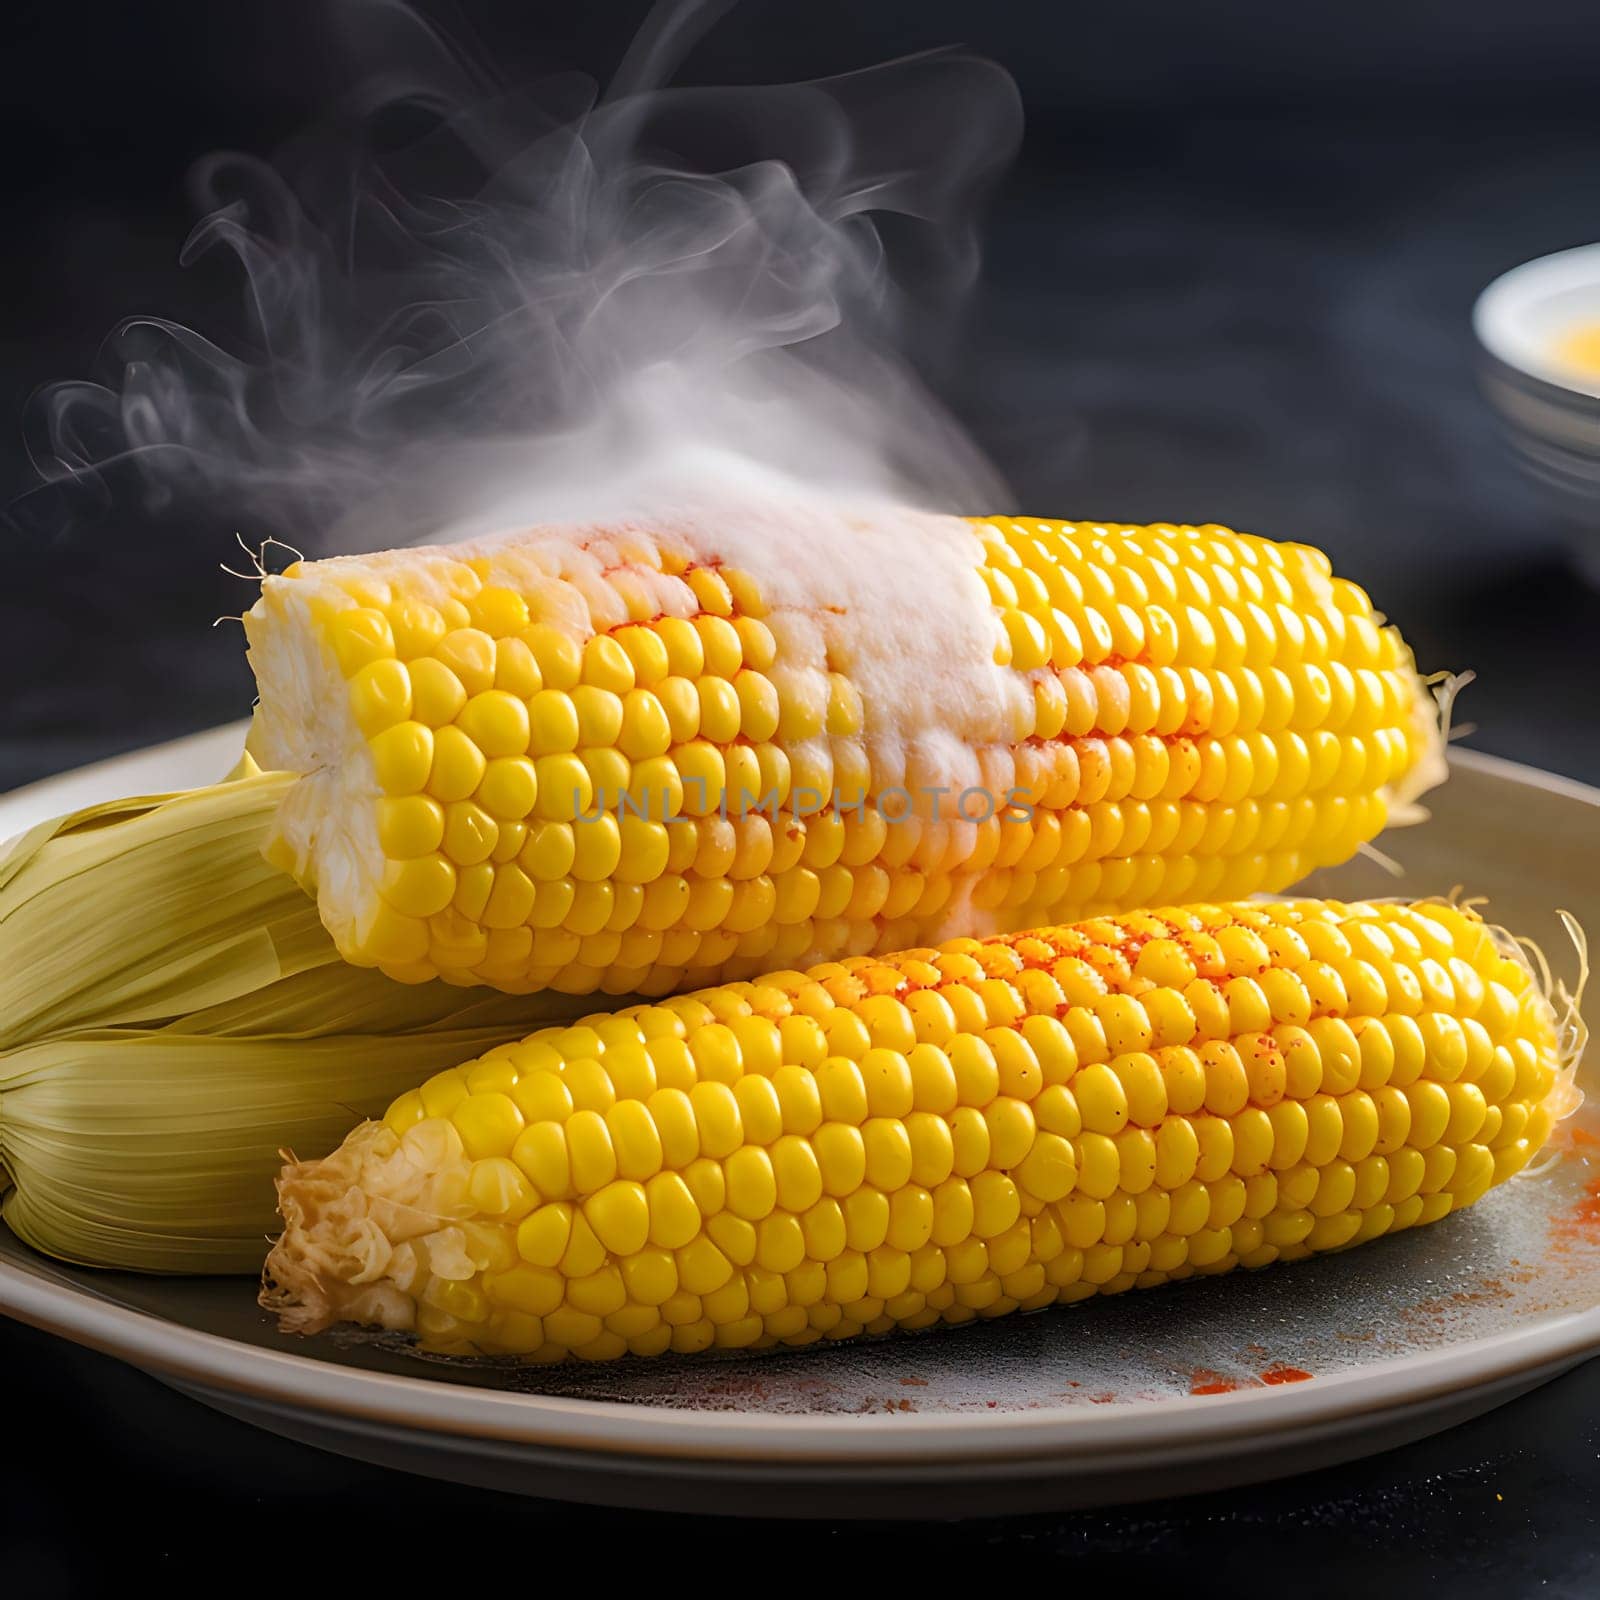 Yellow corn cobs cooked on a plate with steam. Corn as a dish of thanksgiving for the harvest. An atmosphere of joy and celebration.